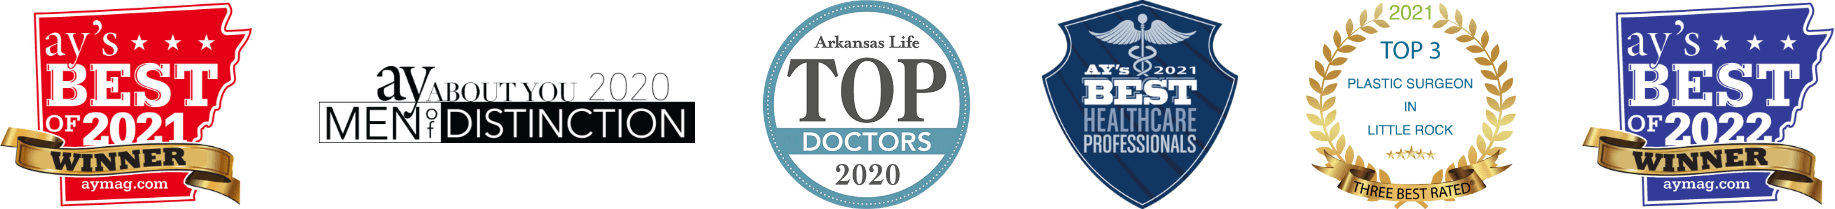 Wright Plastic Surgery awards from ay's best of 2021 and 2022, ay about you 2020 men of distinction, arkansas life top 2020 doctors, top 3 plastic surgeons in little rock 2021